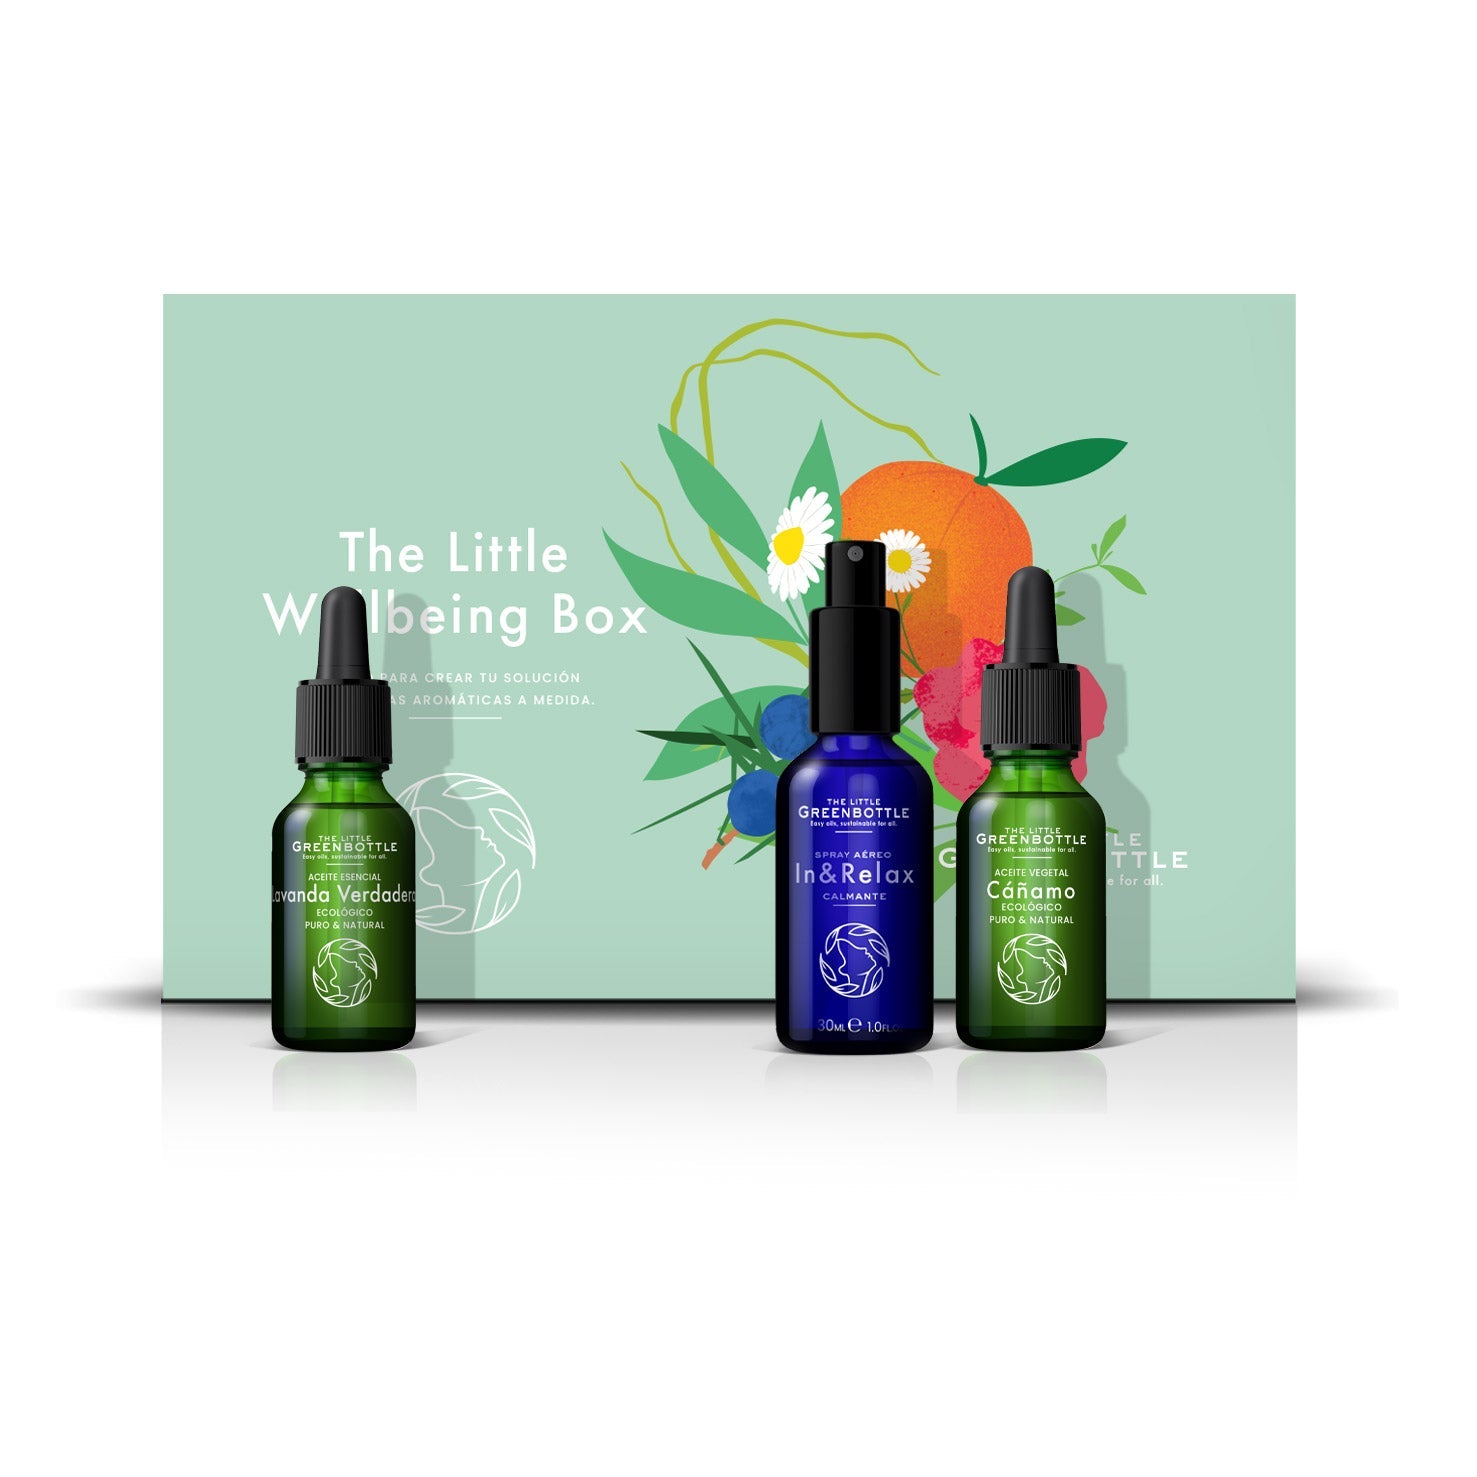 THE LITTLE WELLBEING BOX TLGB